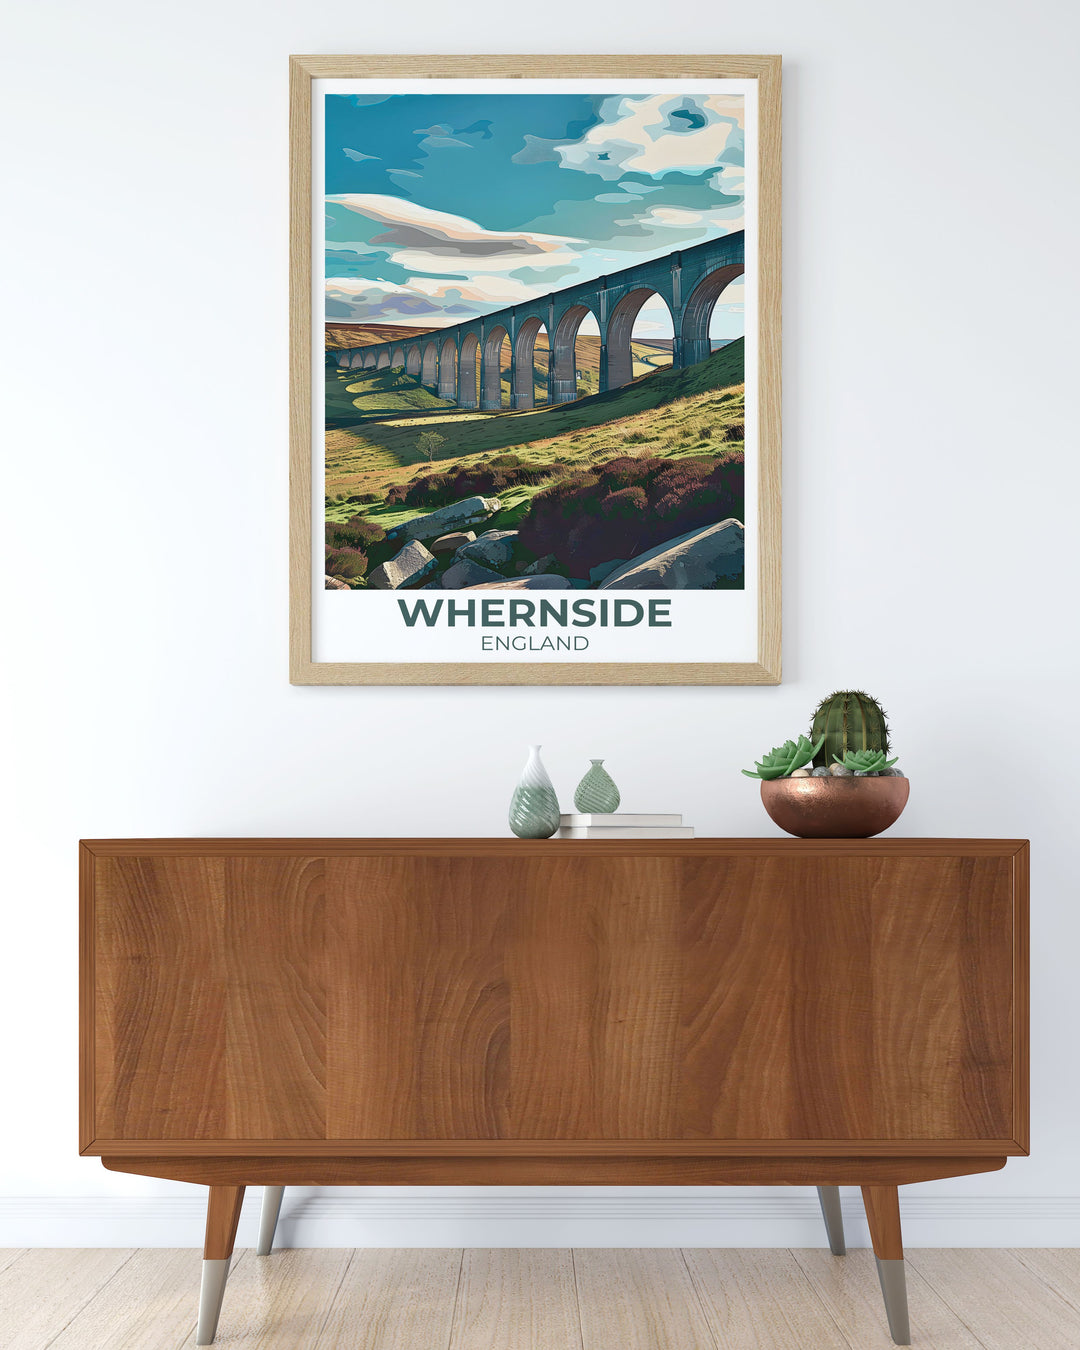 Fine art print of Whernside, showcasing the peaks rugged landscapes and scenic trails. A beautiful piece that brings the essence of Yorkshires outdoor beauty into your home decor, perfect for nature lovers.